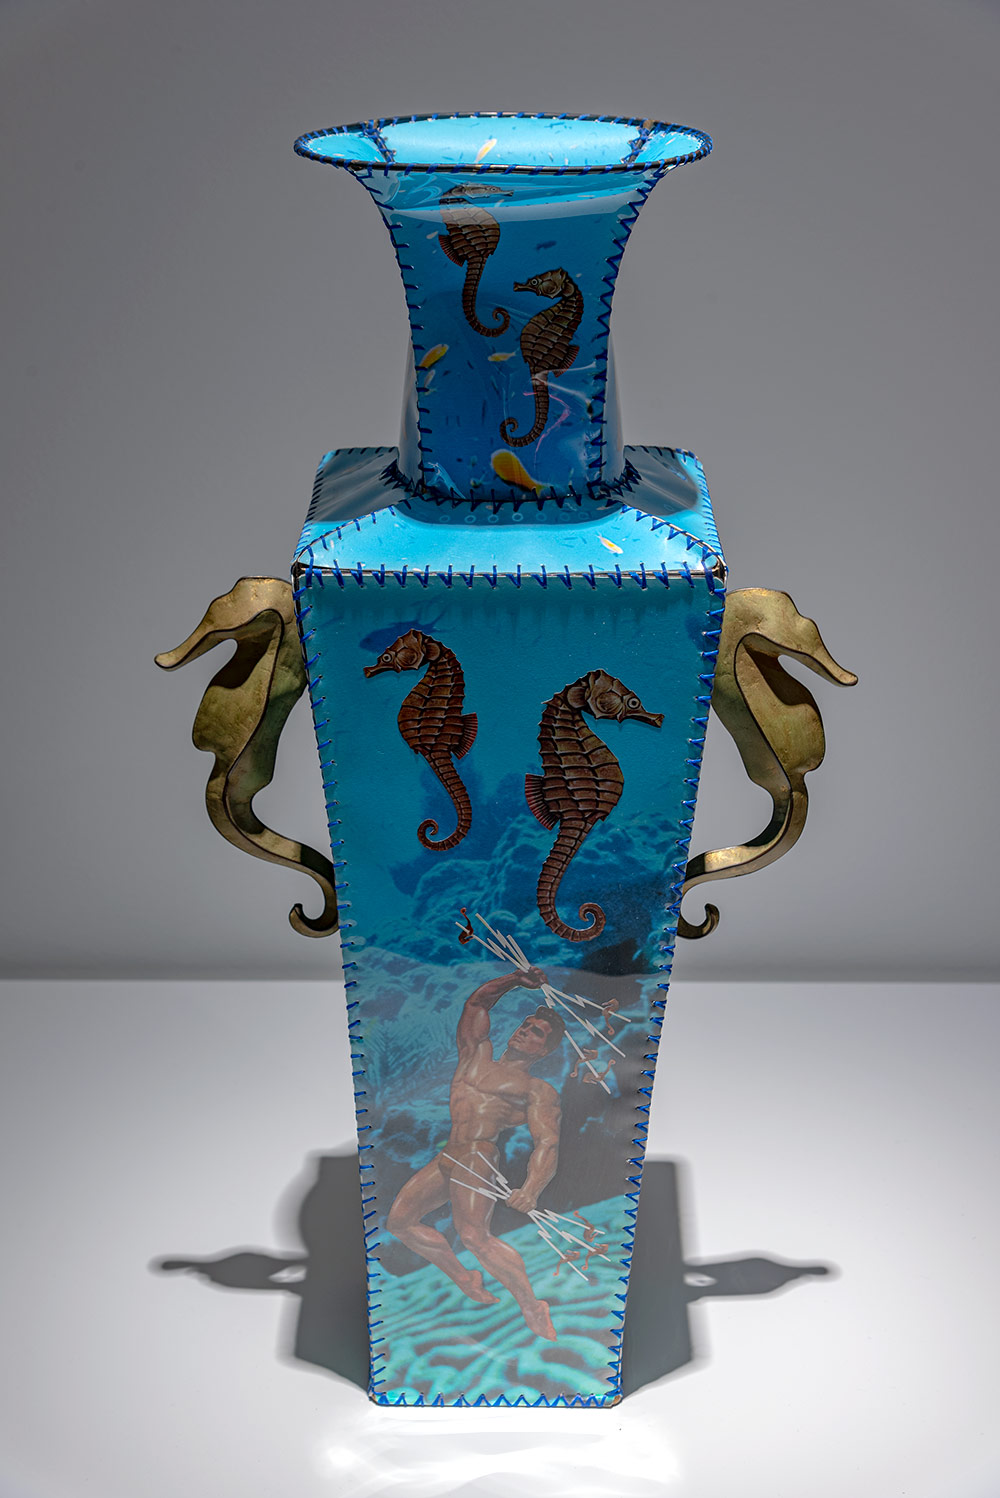 Traditional Chinese Medicine Series: Seahorse Vase by Anne Lemanski